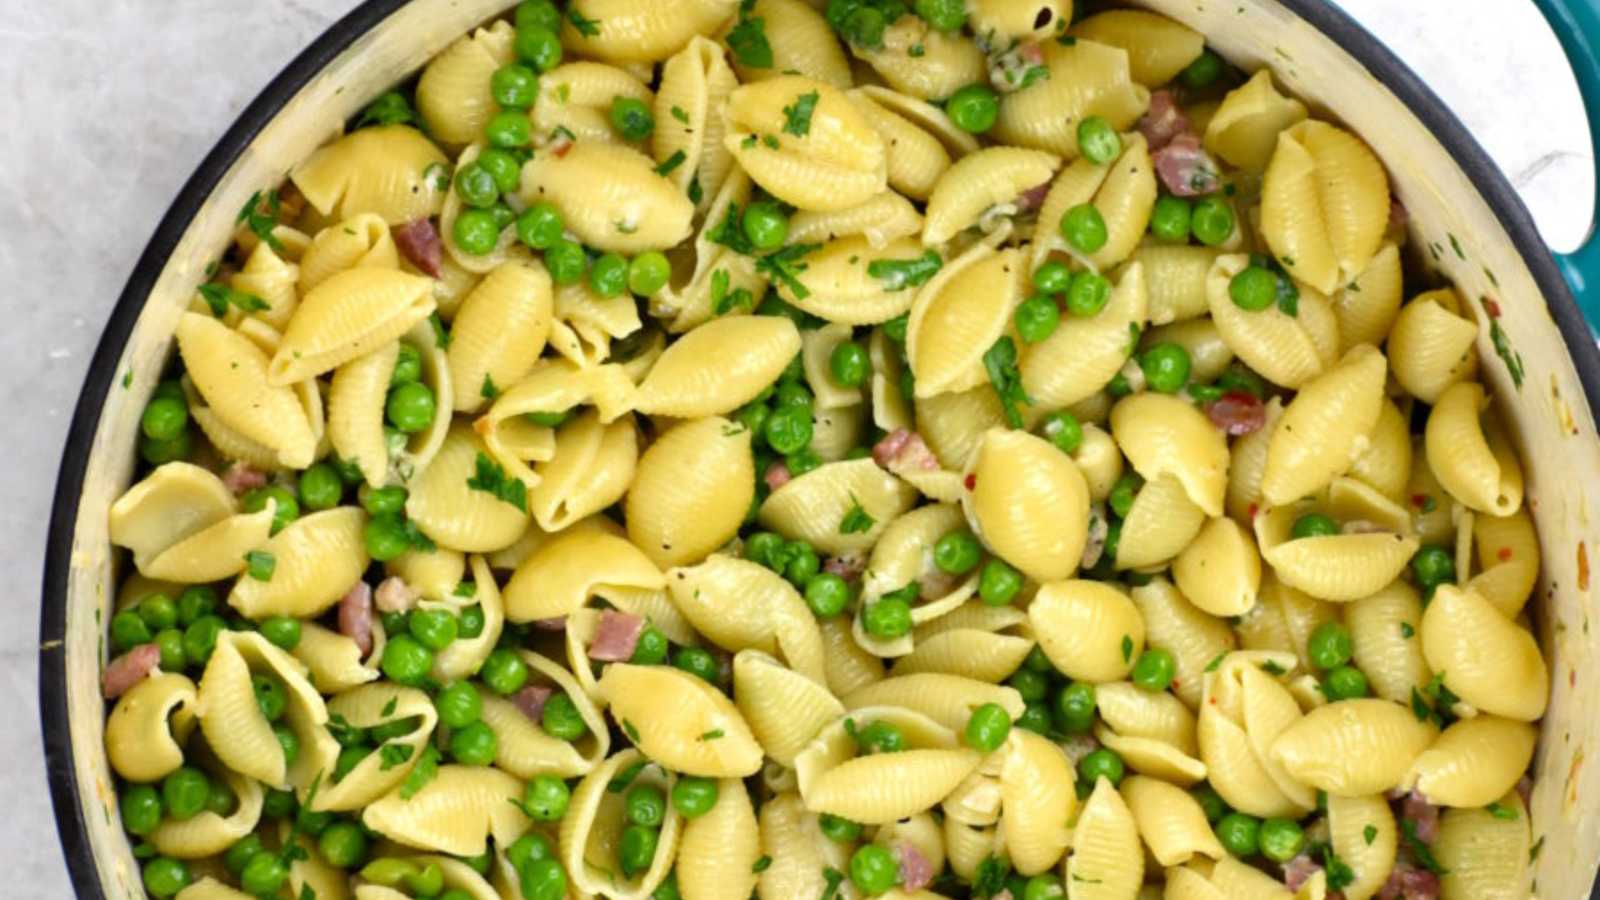 A delicious bowl of pasta with vibrant green peas and savory ham.